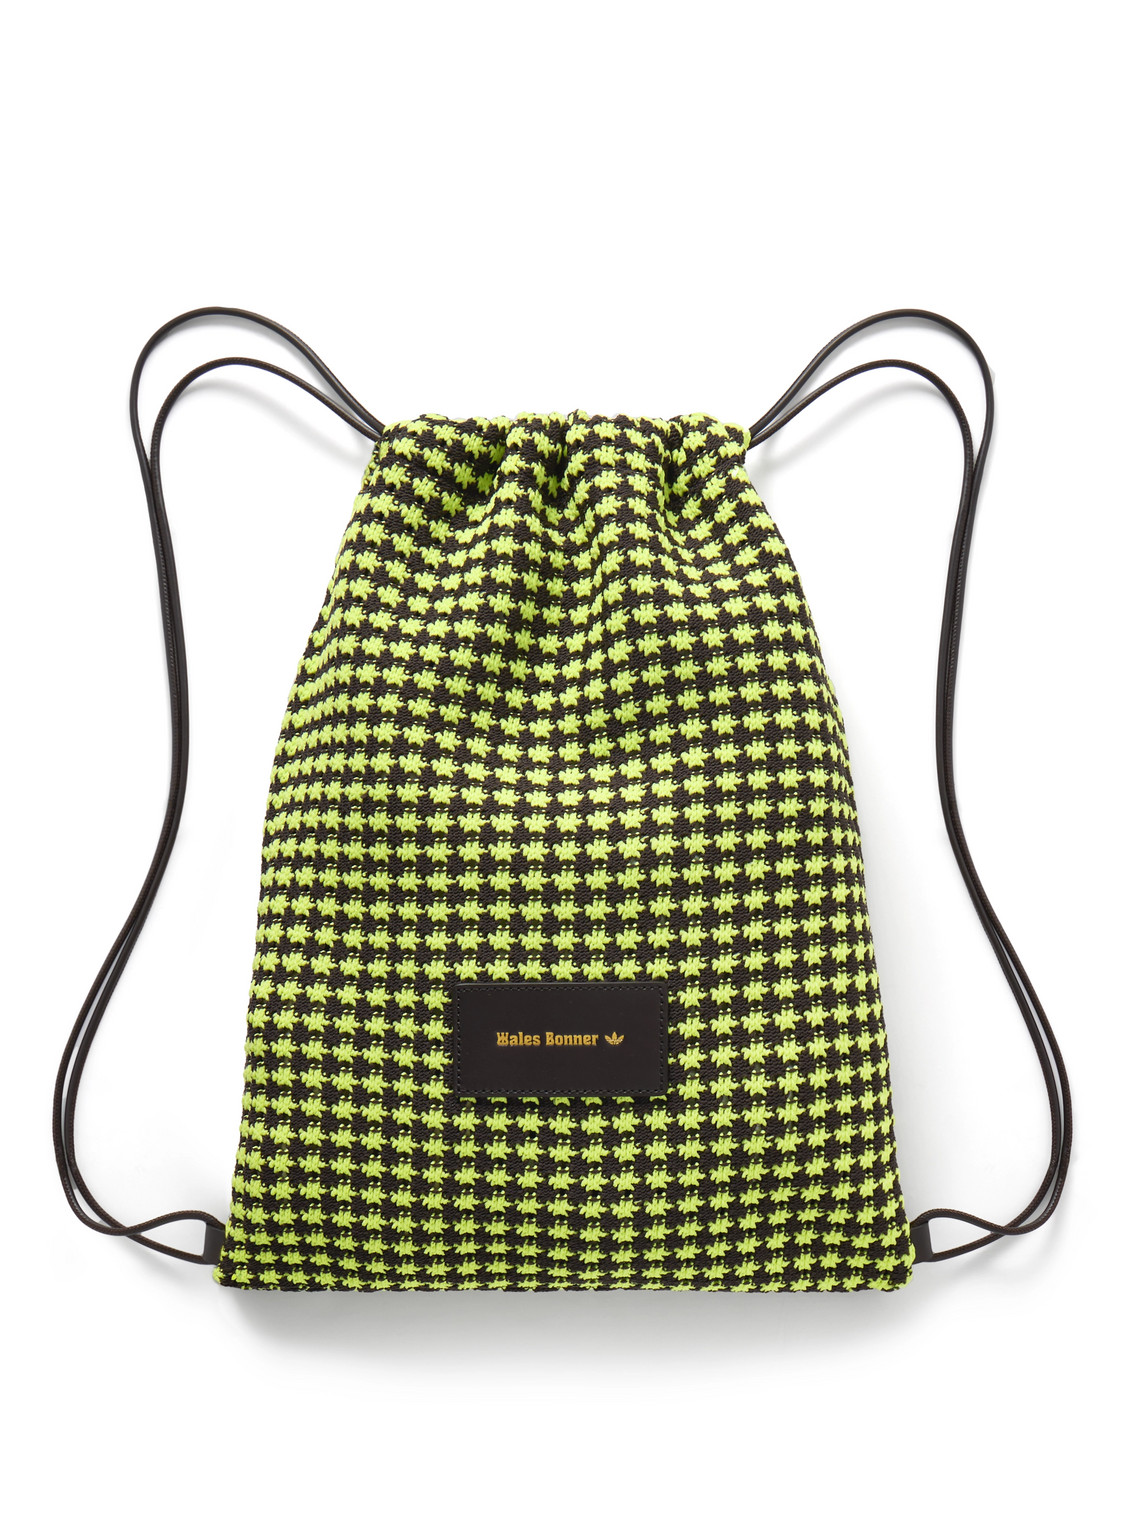 Wales Bonner Faux Leather-Trimmed Crocheted Drawstring Backpack